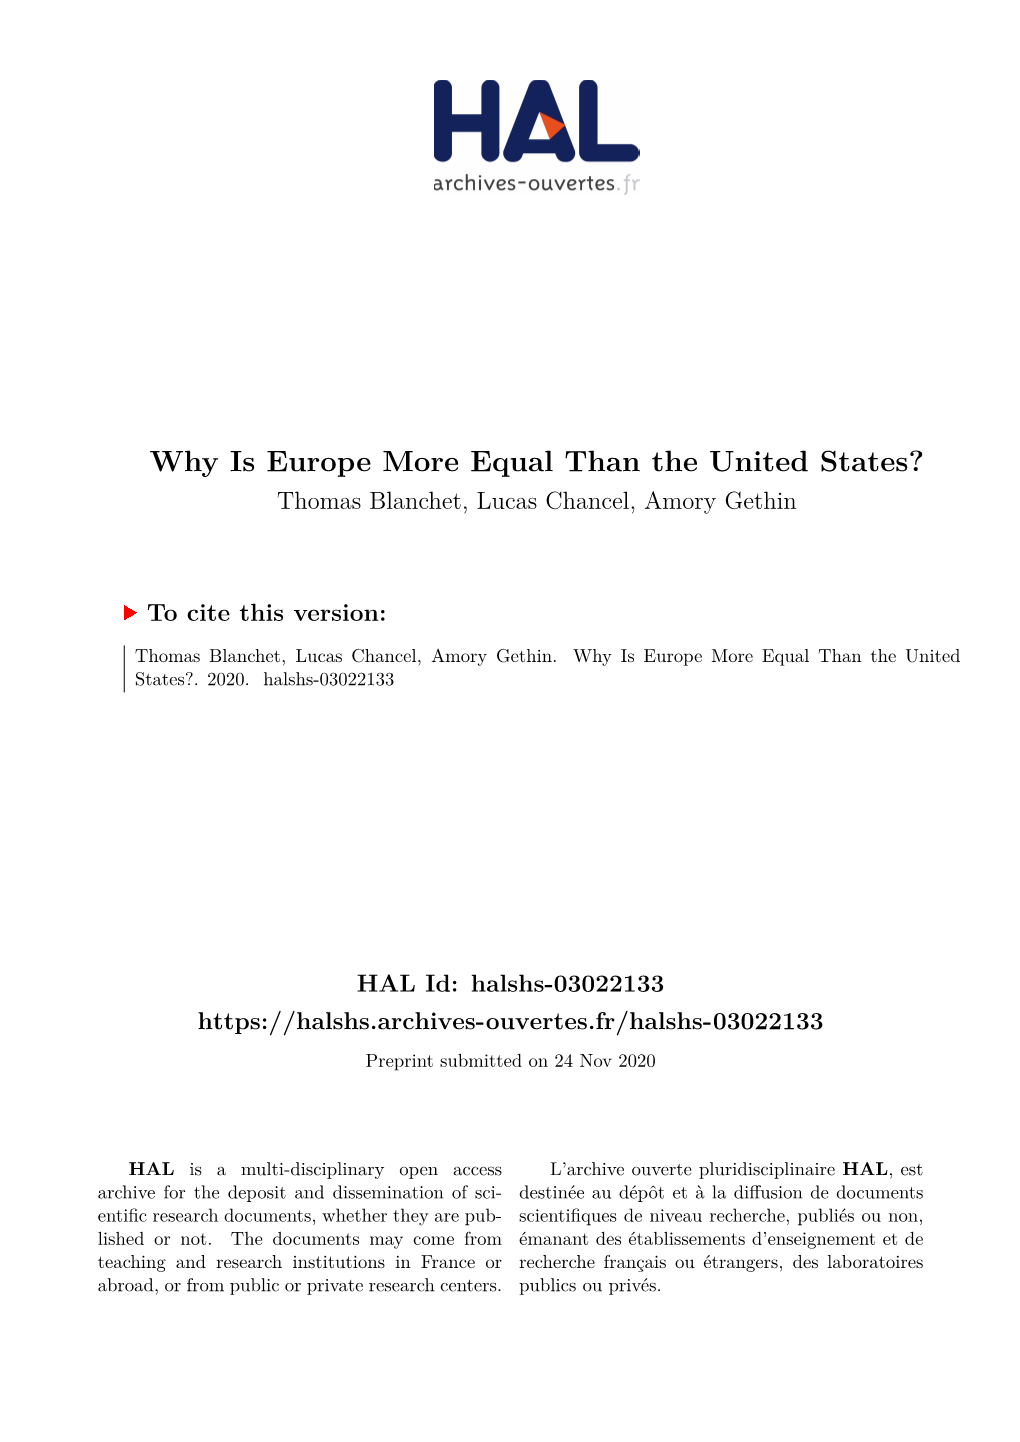 Why Is Europe More Equal Than the United States? Thomas Blanchet, Lucas Chancel, Amory Gethin